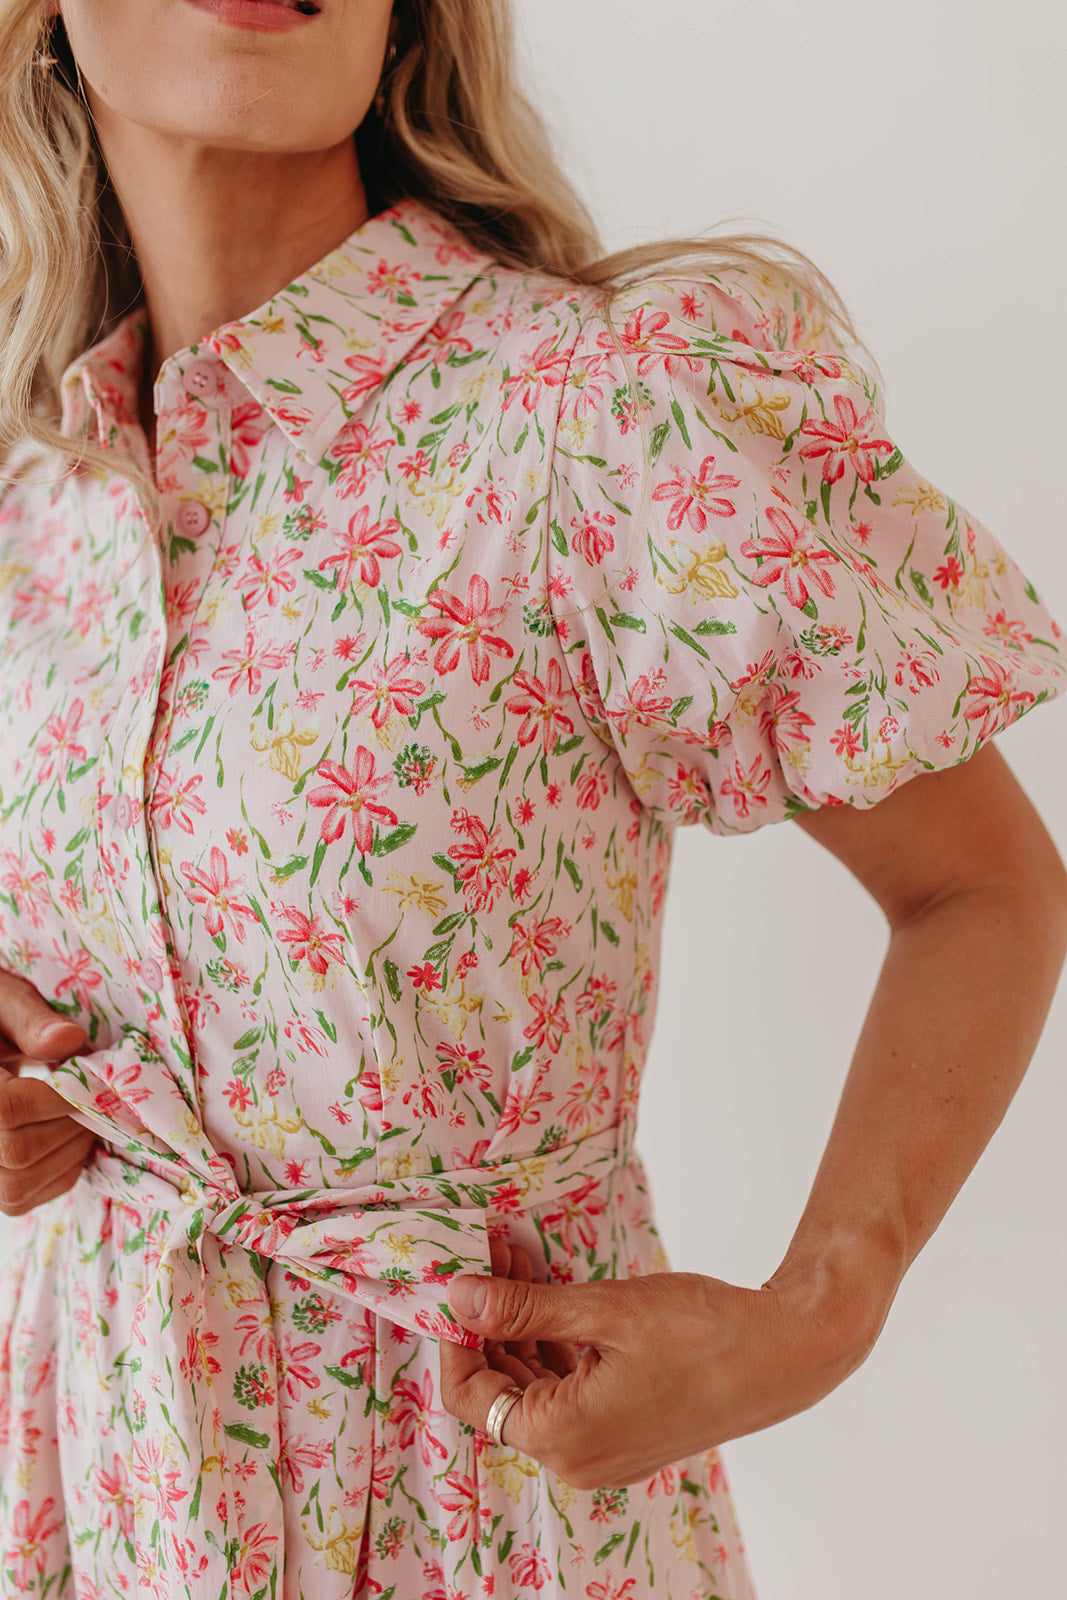 THE STACEY BUTTON DOWN DRESS IN PINK FLORAL